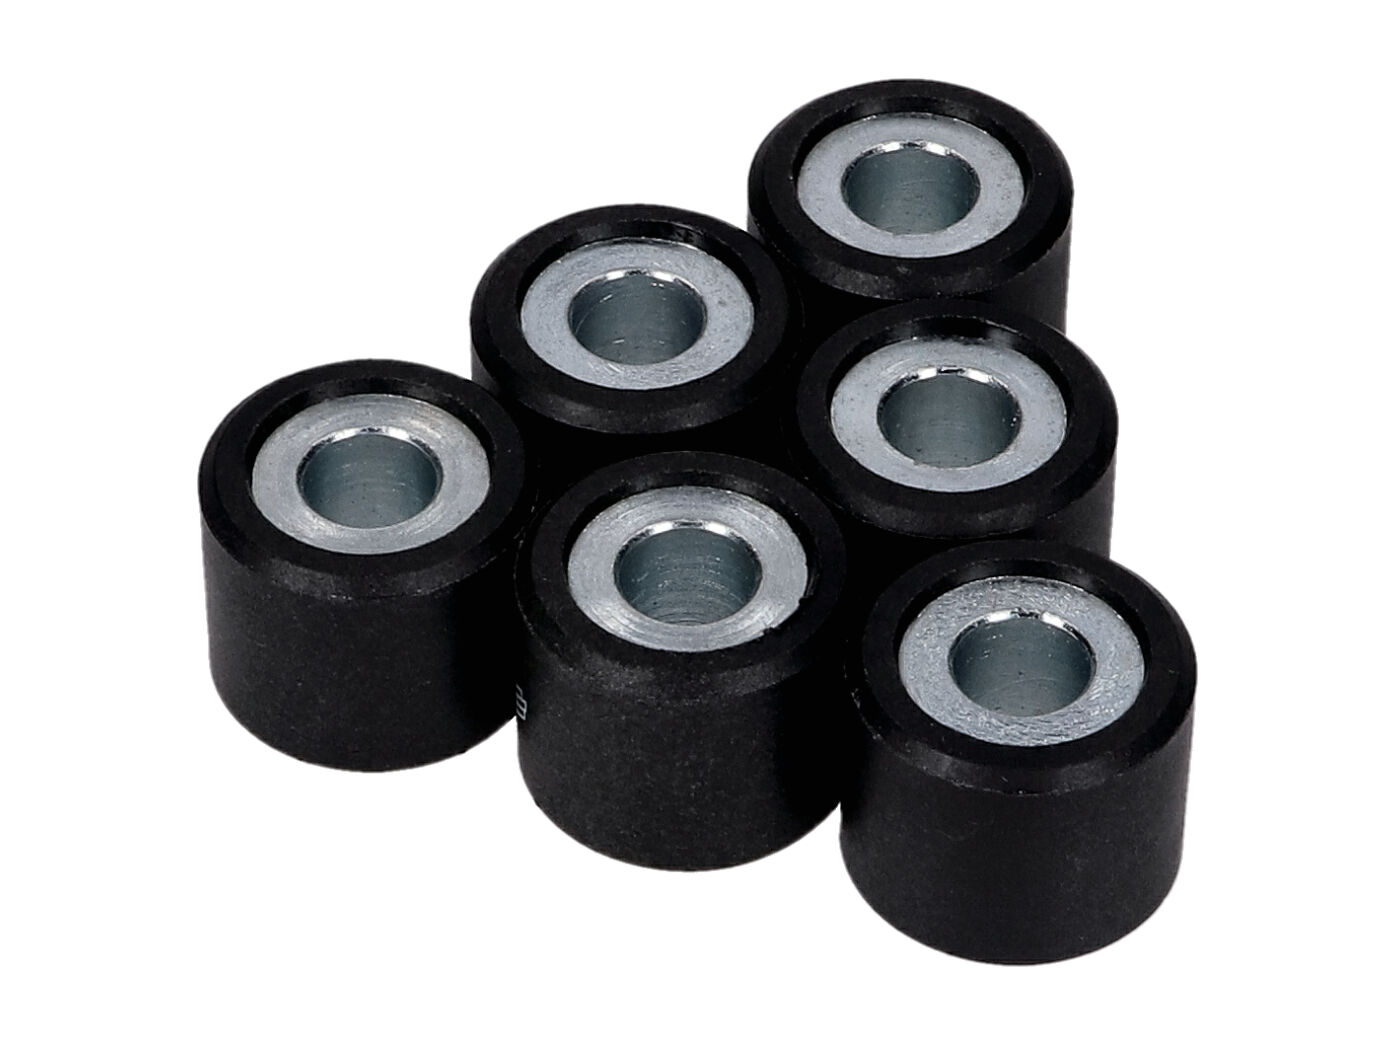 Scooter Moped 15 x 12mm Polini 5.5g Variator Rollers 